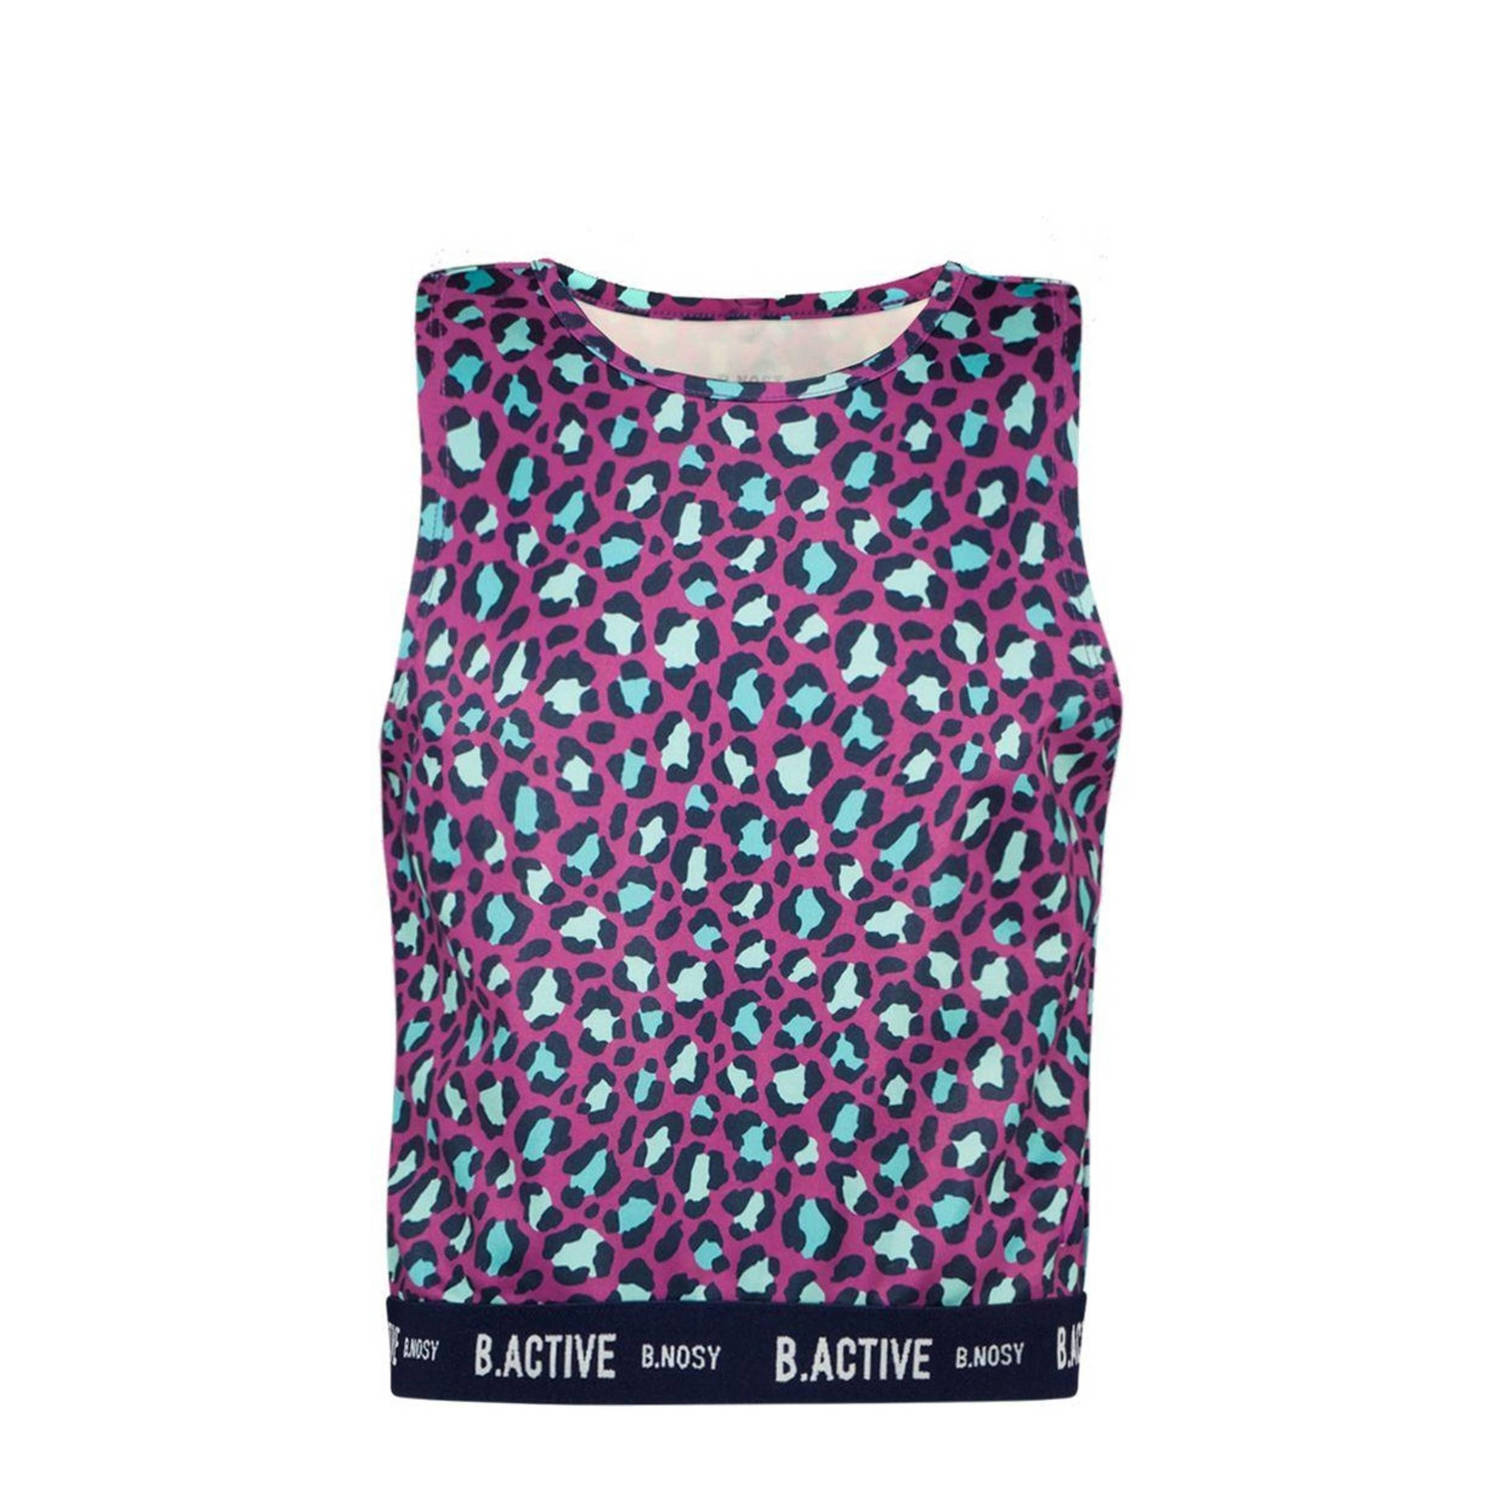 B.Nosy tanktop Amy paars aqua donkerblauw Sporttop Meisjes Gerecycled polyester Ronde hals 134 140